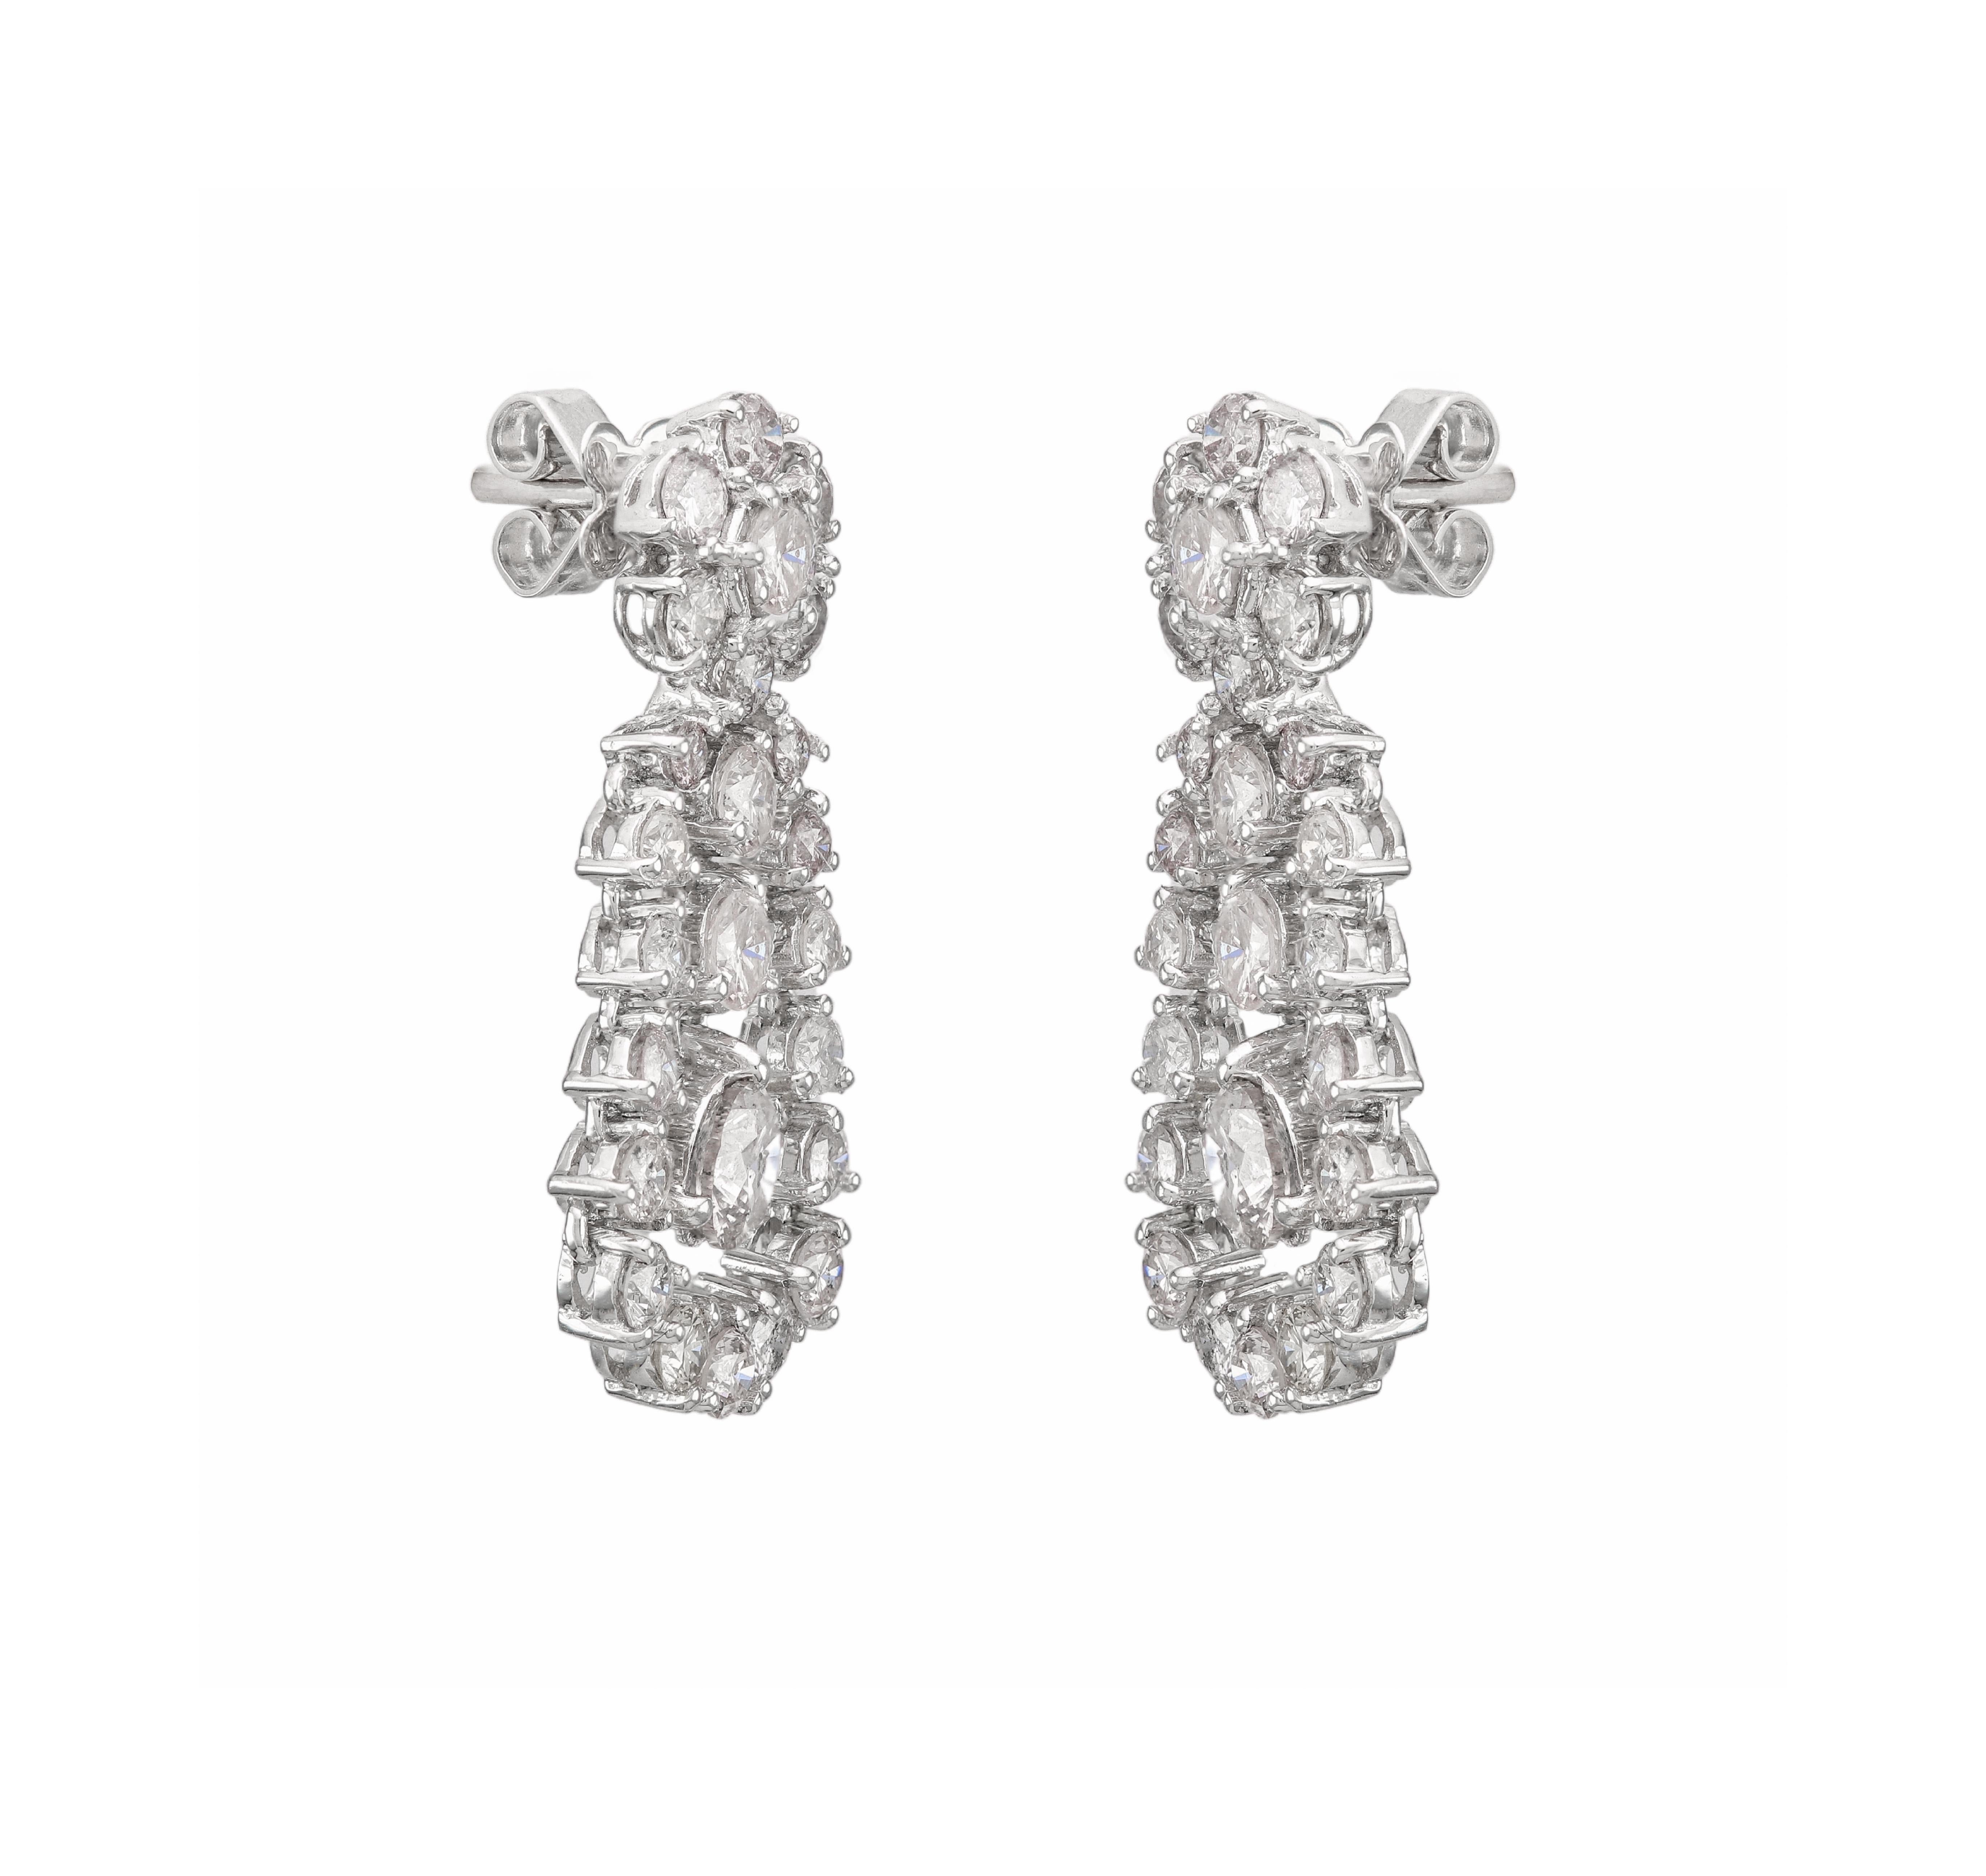 Diamond Floral Cluster Drop Earrings 4.40 Carat Diamonds

Magnificent Edwardian Style, pair of victorian style diamond floral cluster drop earrings, featuring a total of 4.40 carat diamonds. This beautiful earring has frequently larger stones, there